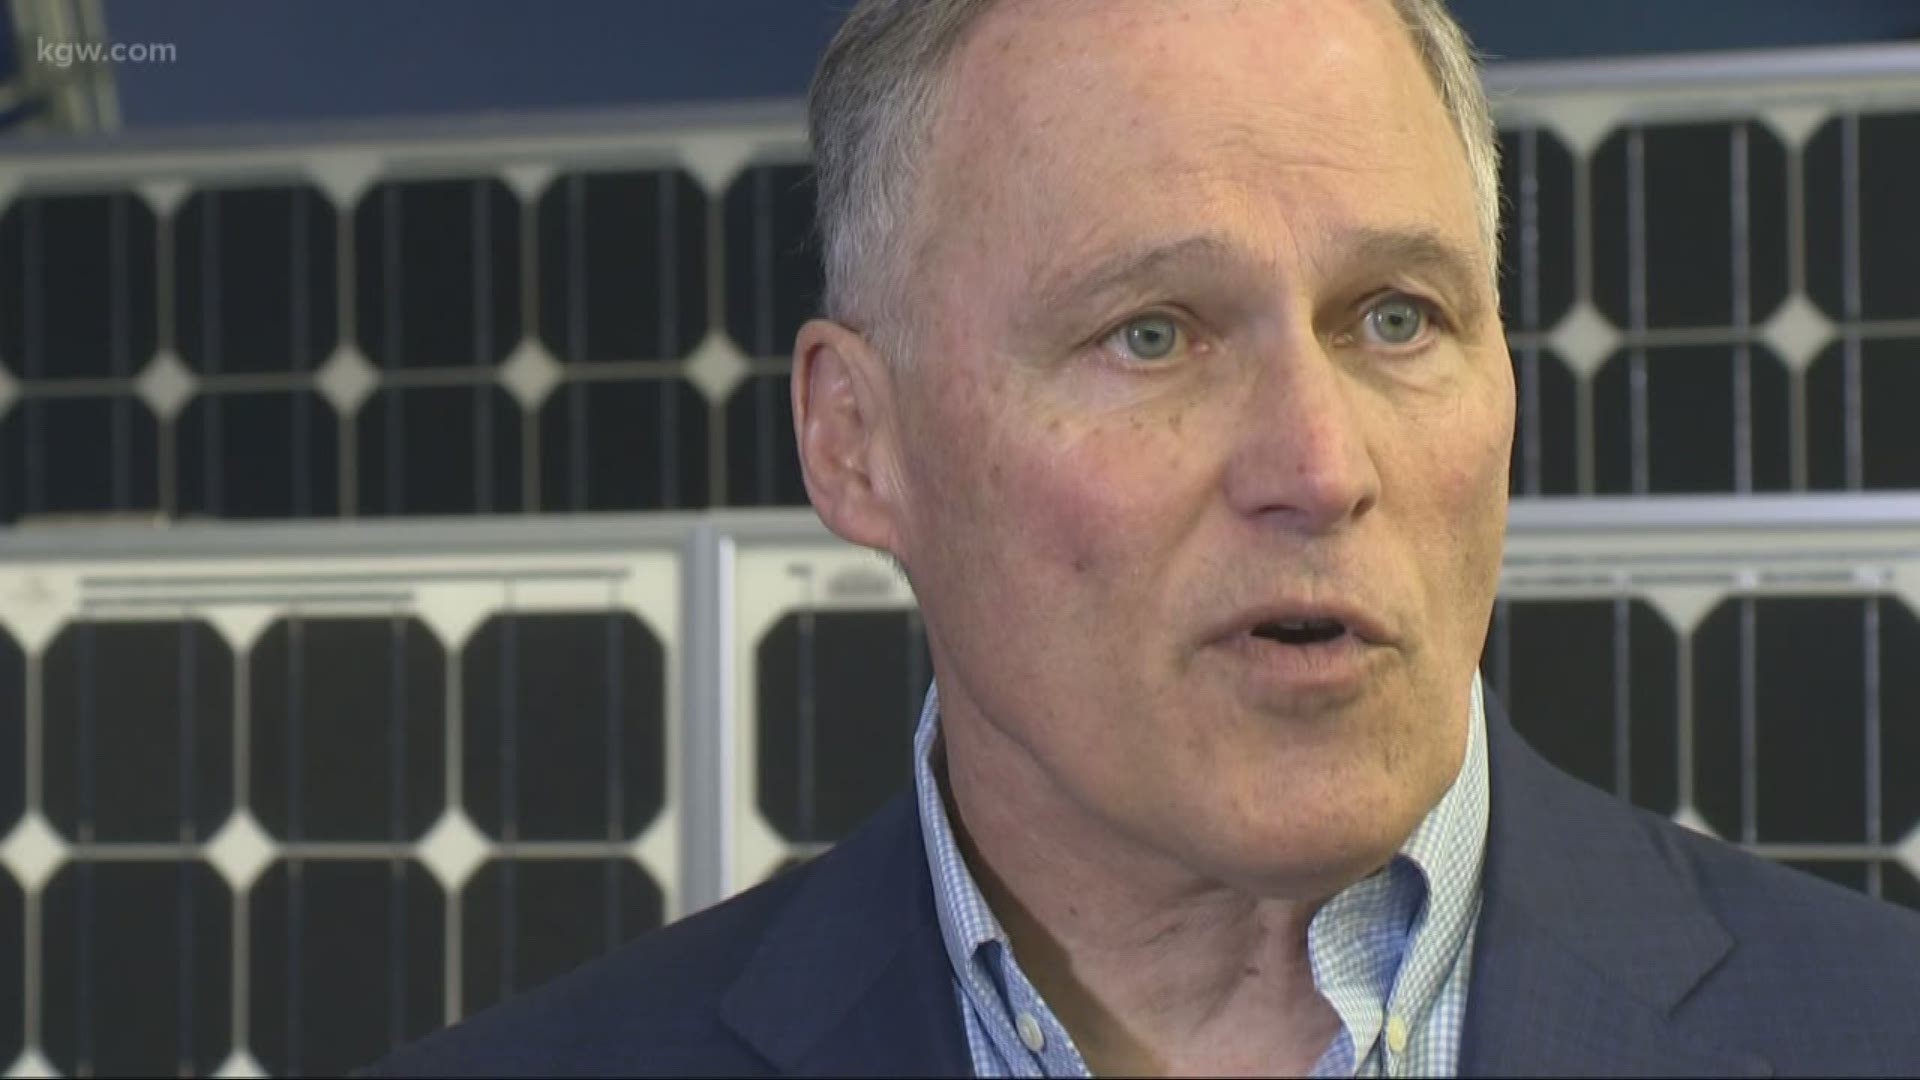 Washington Governor Jay Inslee made a campaign stop in Oregon on Saturday in his bid for the Democratic nomination for president. Inslee met with union leaders at the International Brotherhood of Electrical Workers Local 48 Training Center in Northeast Portland.